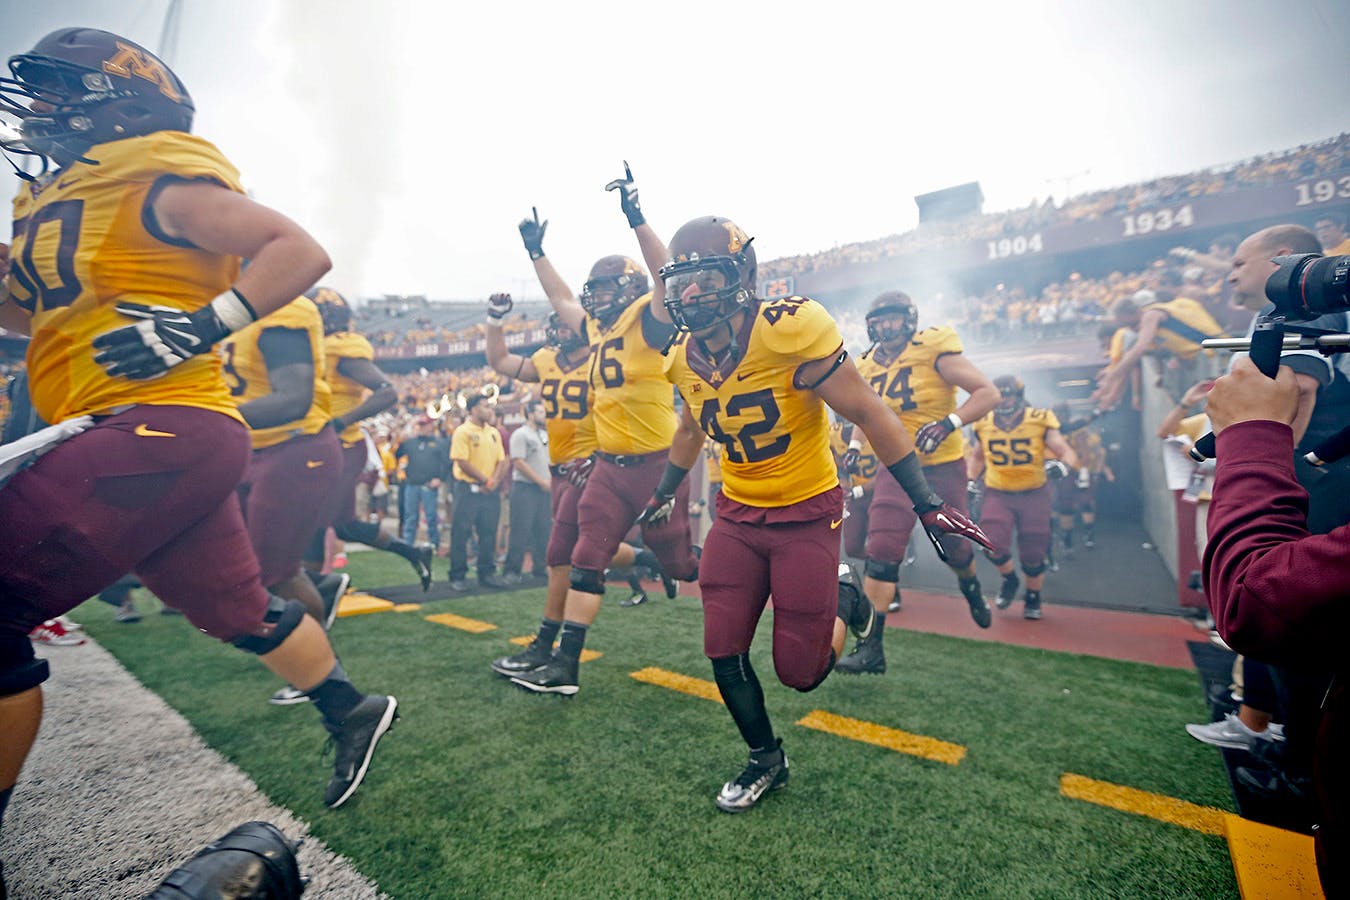 The Gophers football team takes their 1-0 record into their second game with a few injuries against Middle Tennessee State.